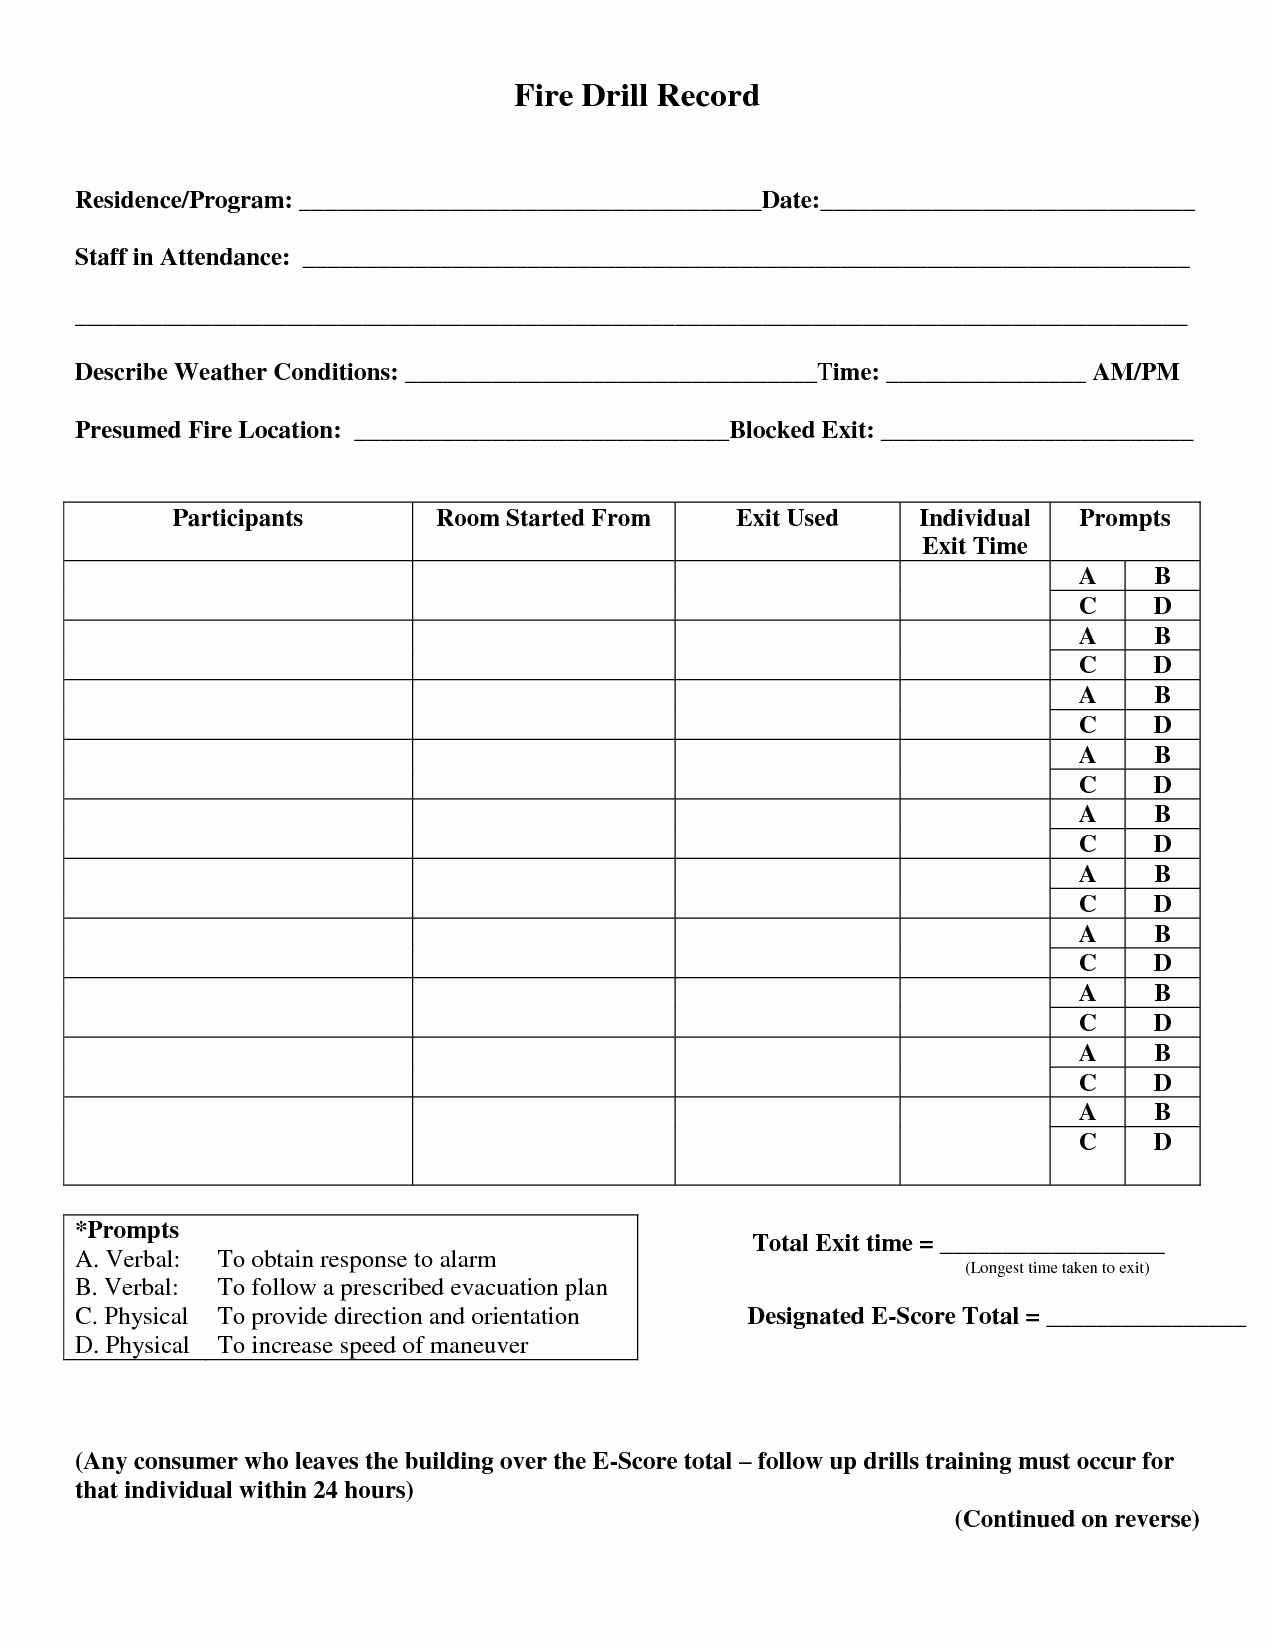 Fire Drill Report Template Luxury Best S Of Record Emergency Evacuation Drills